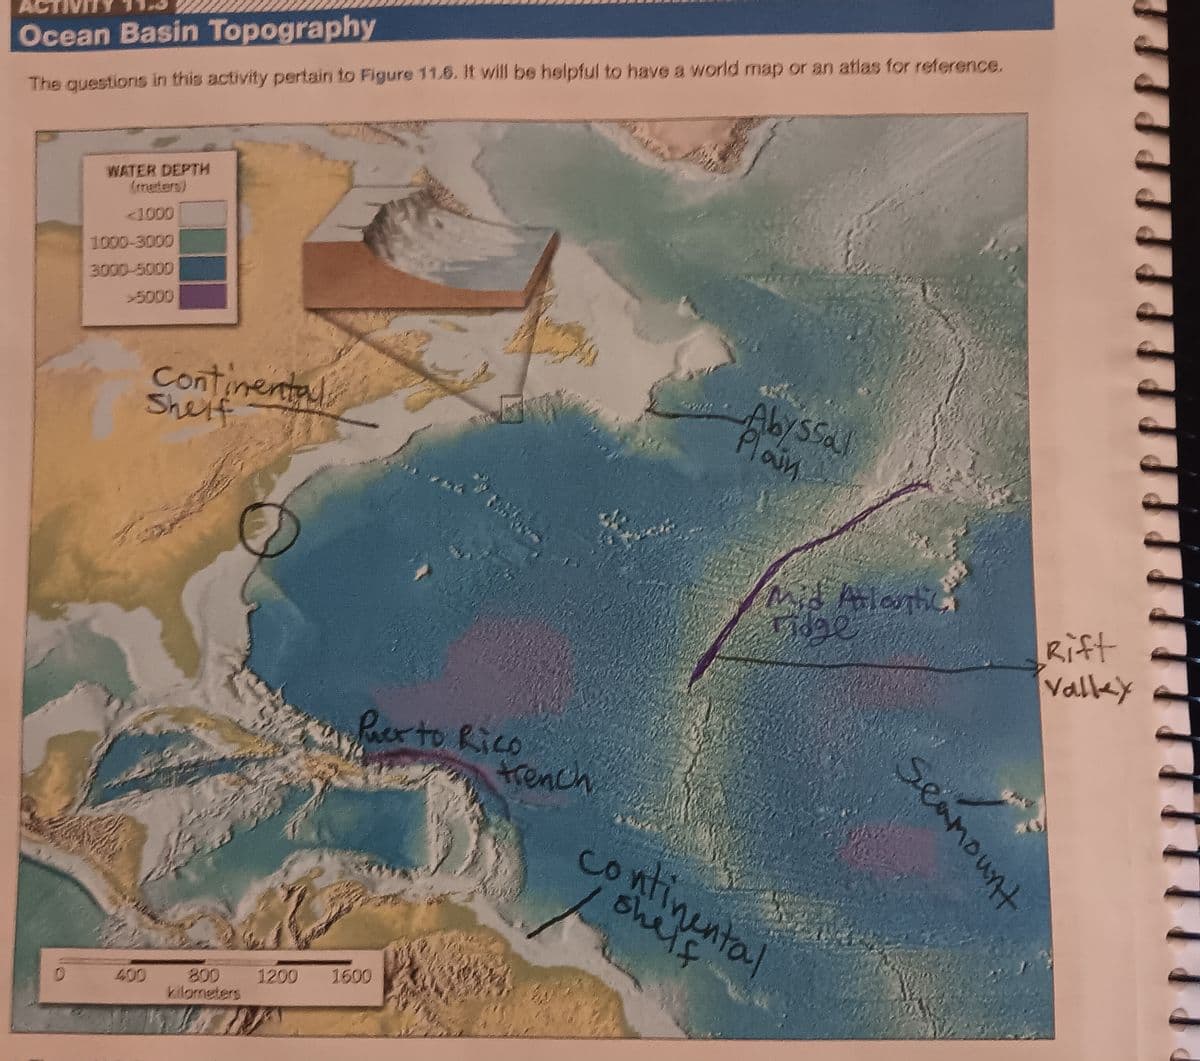 ACTIVITY
Ocean Basin Topography
The questions in this activity pertain to Figure 11.6. It will be helpful to have a world map or an atlas for reference.
WATER DEPTH
(meters)
<1000
1000-3000
3000-5000
Continental
Shelf
kilometers
1200
Puerto Rico
trench
1600
Abyssal
Plain
Mid Atlantic
Fidge
ontinental
seamount
Rift
Valley